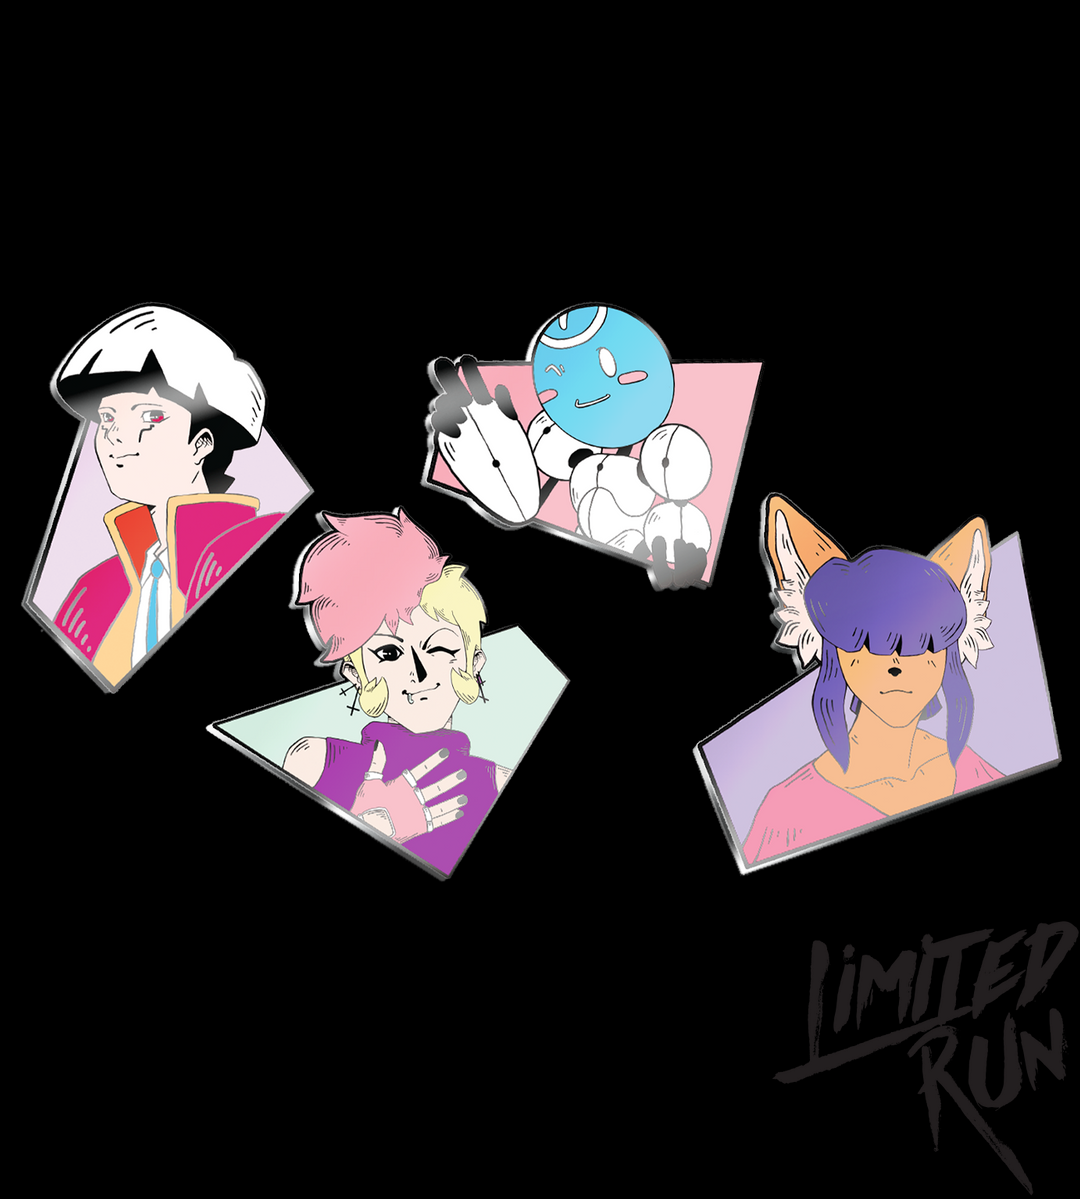 Read Only Memories Pin Pack Limited Run Games